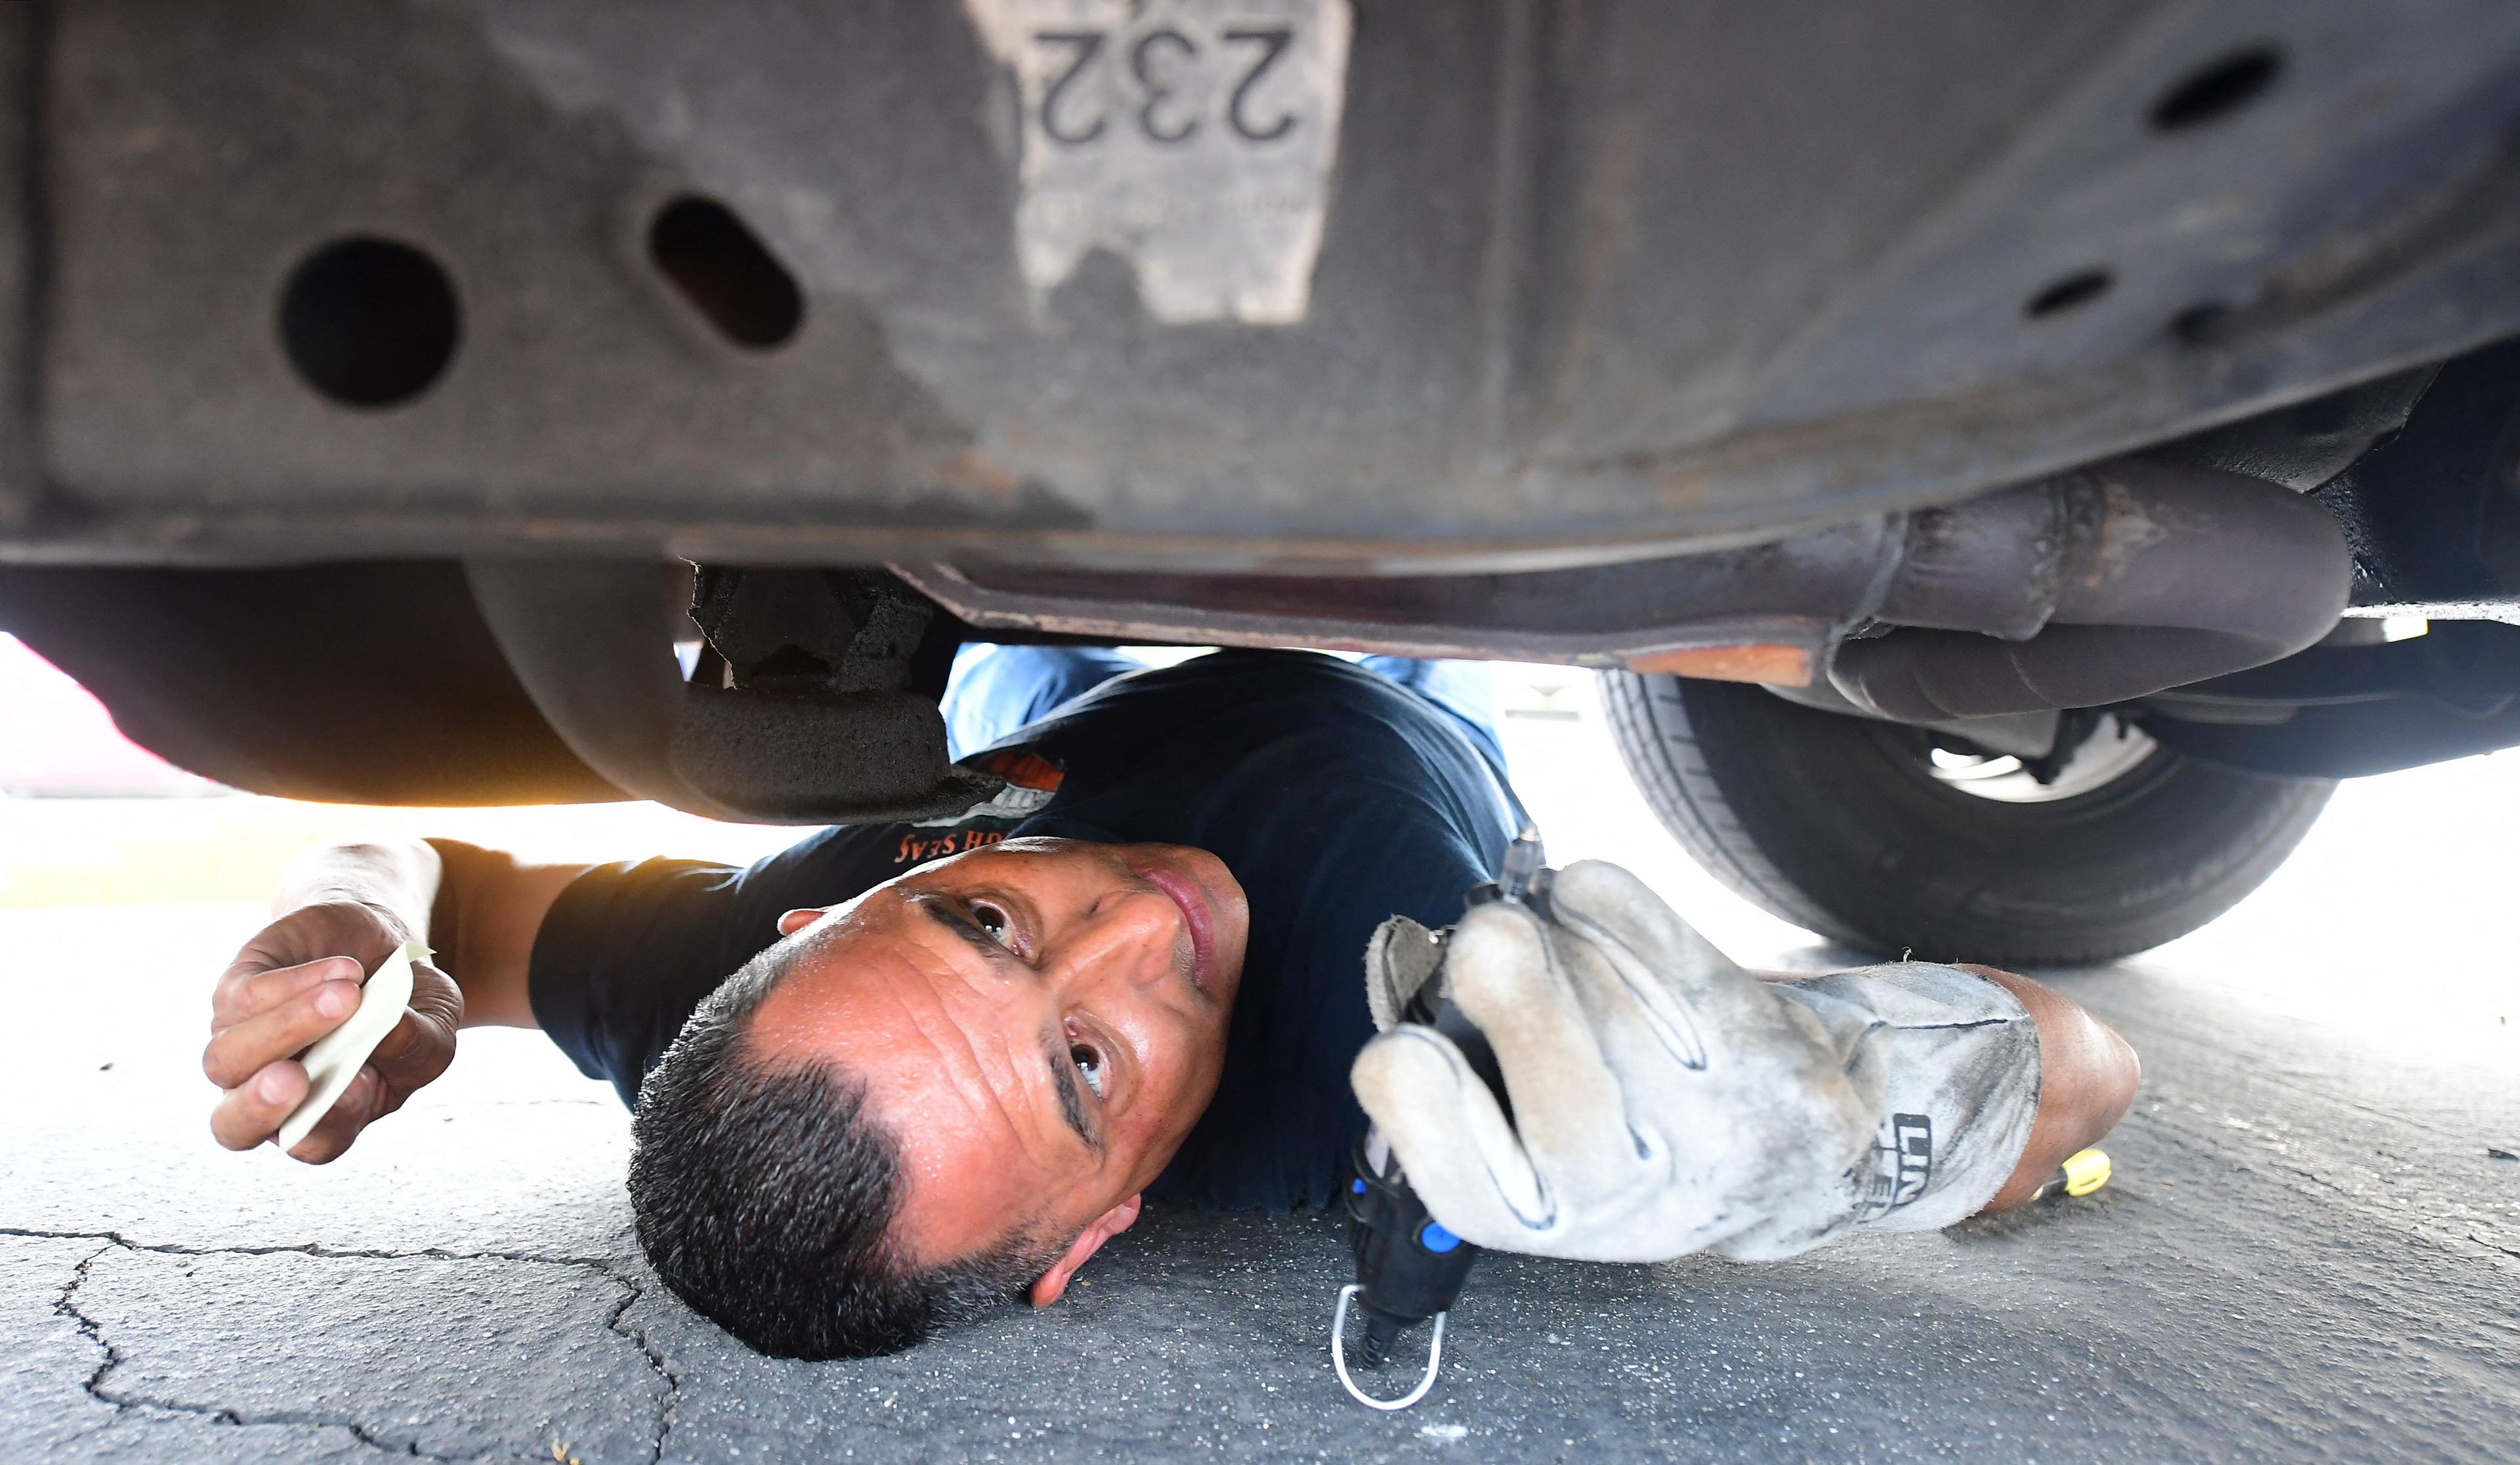 California Legislature Targets Catalytic Converter Thefts With Approved Bill